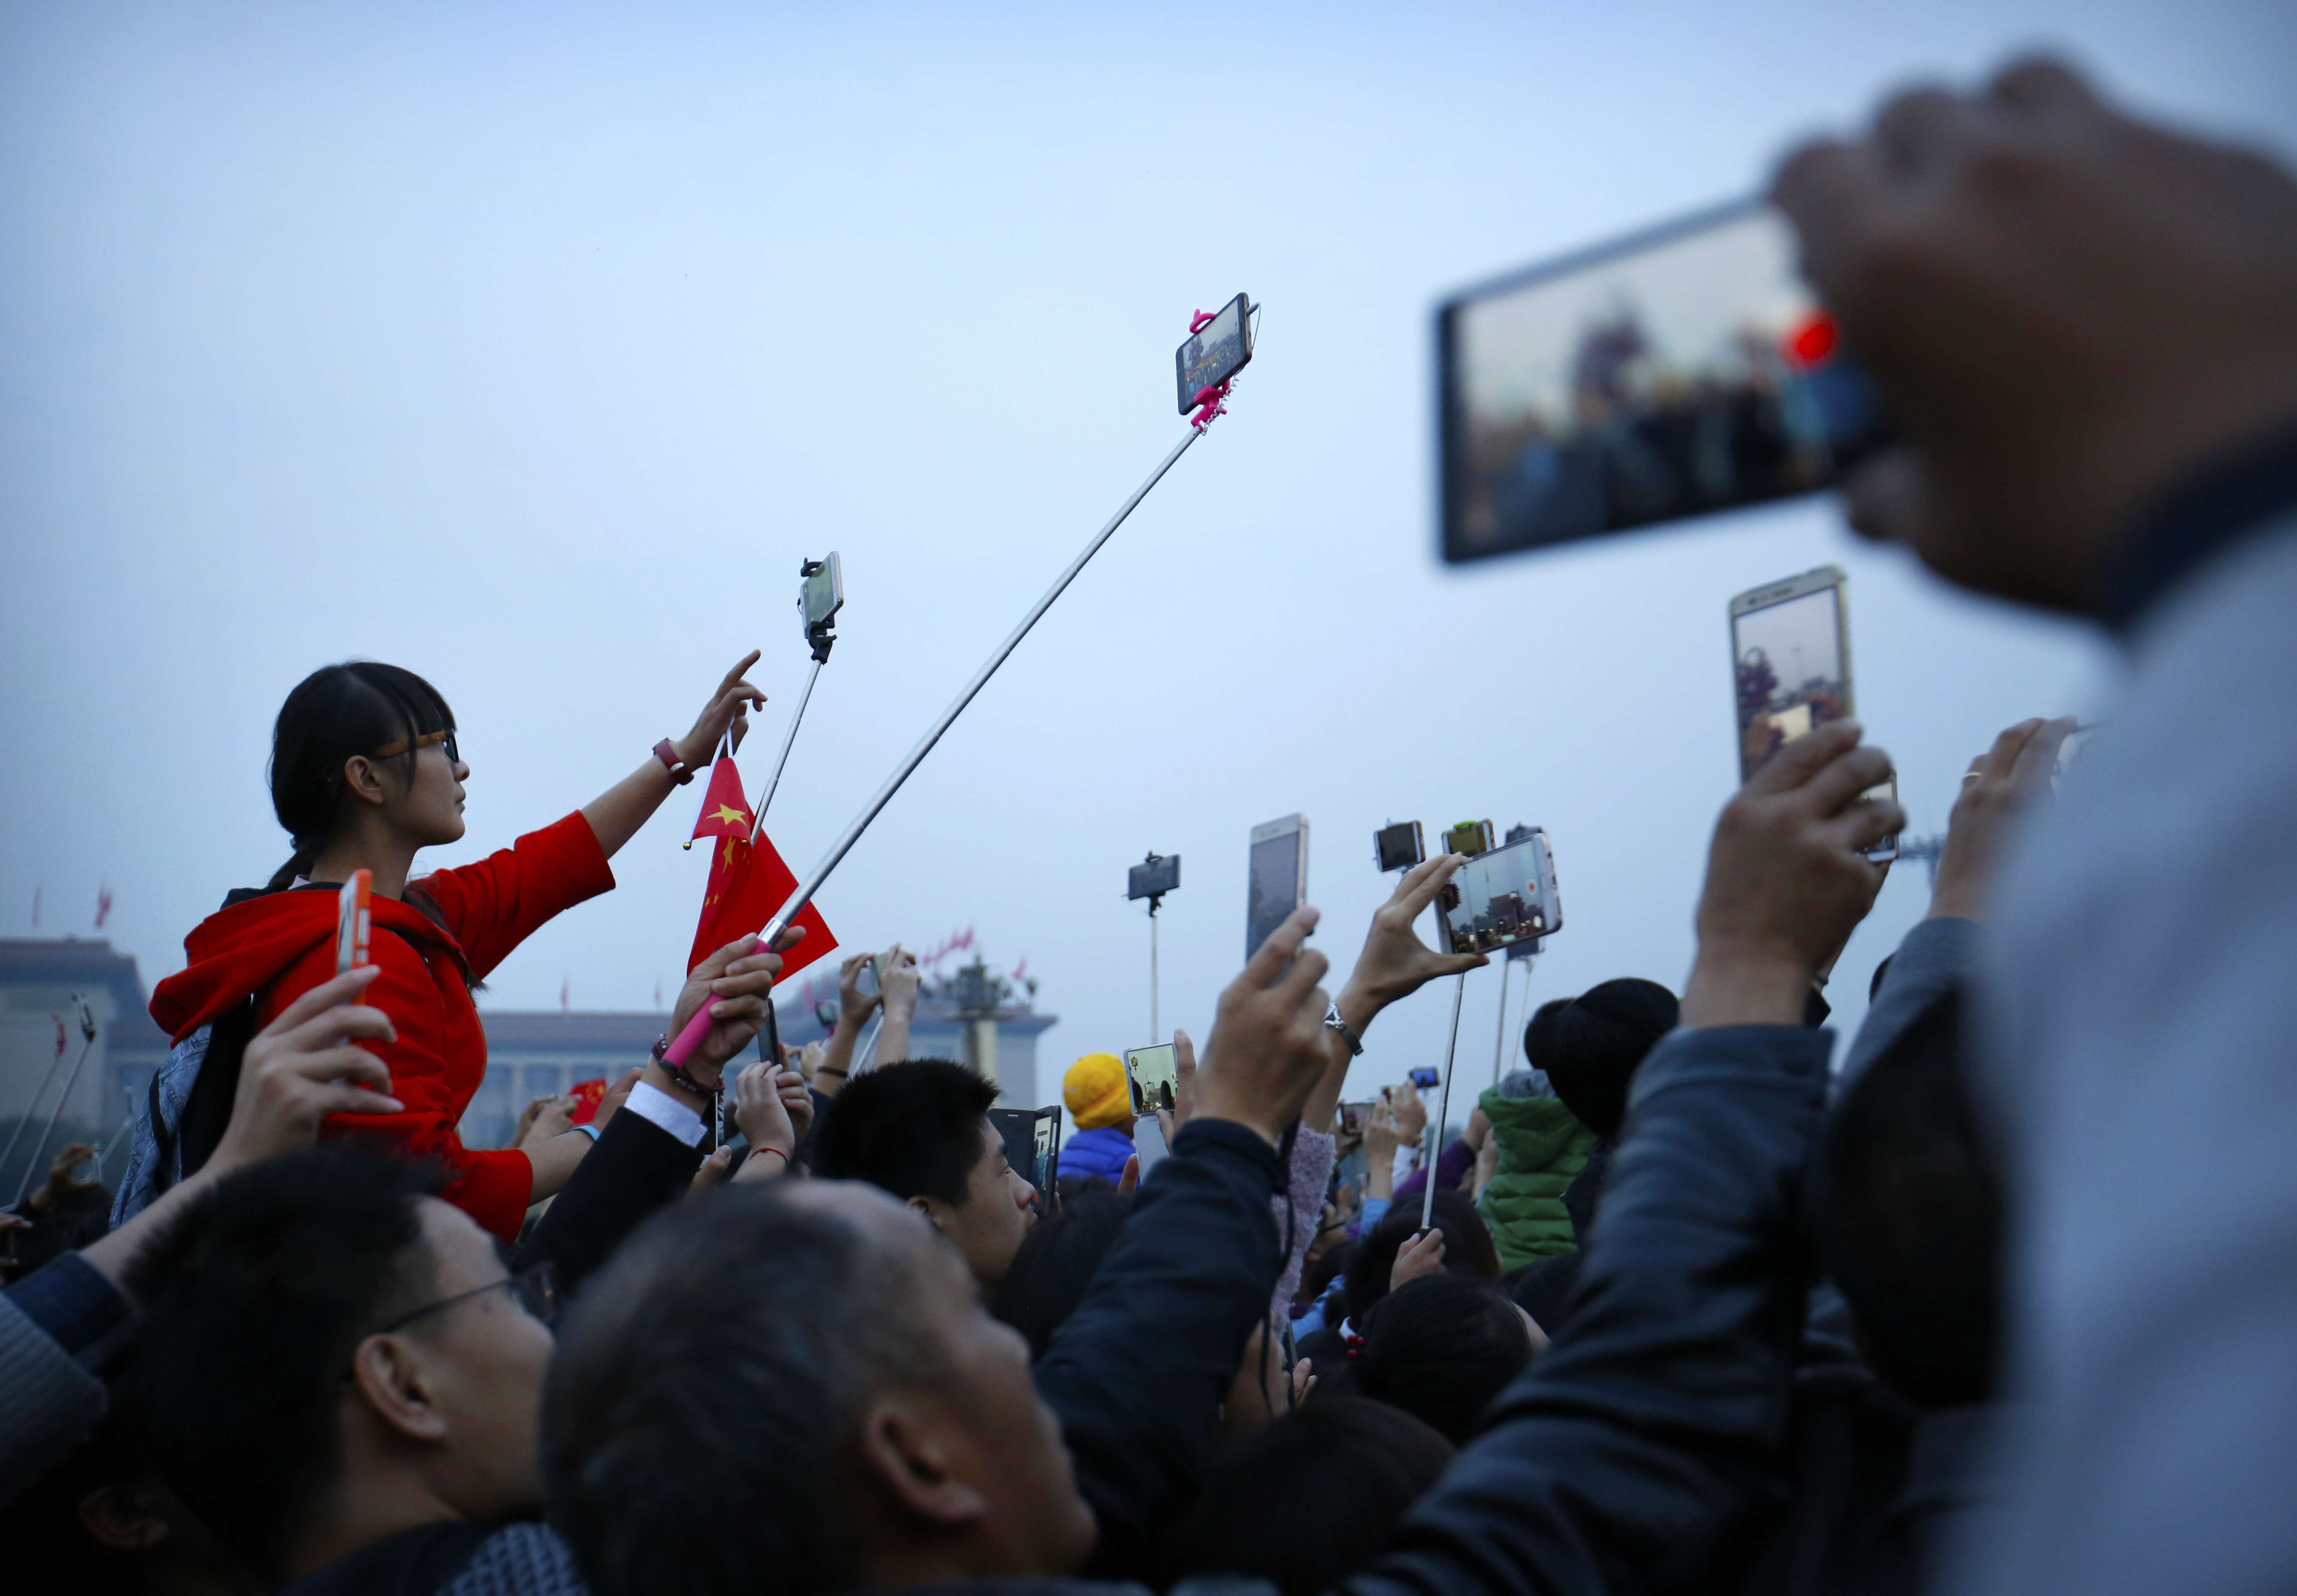 Chinese celebrating National Day on October 1 take photos of the dawn flag-raising ceremony at Tiananmen Square in Beijing. The young adults of the 21st century, along with the technological tools at their disposal, should act as a force of checks and balances in society. Photo: AP